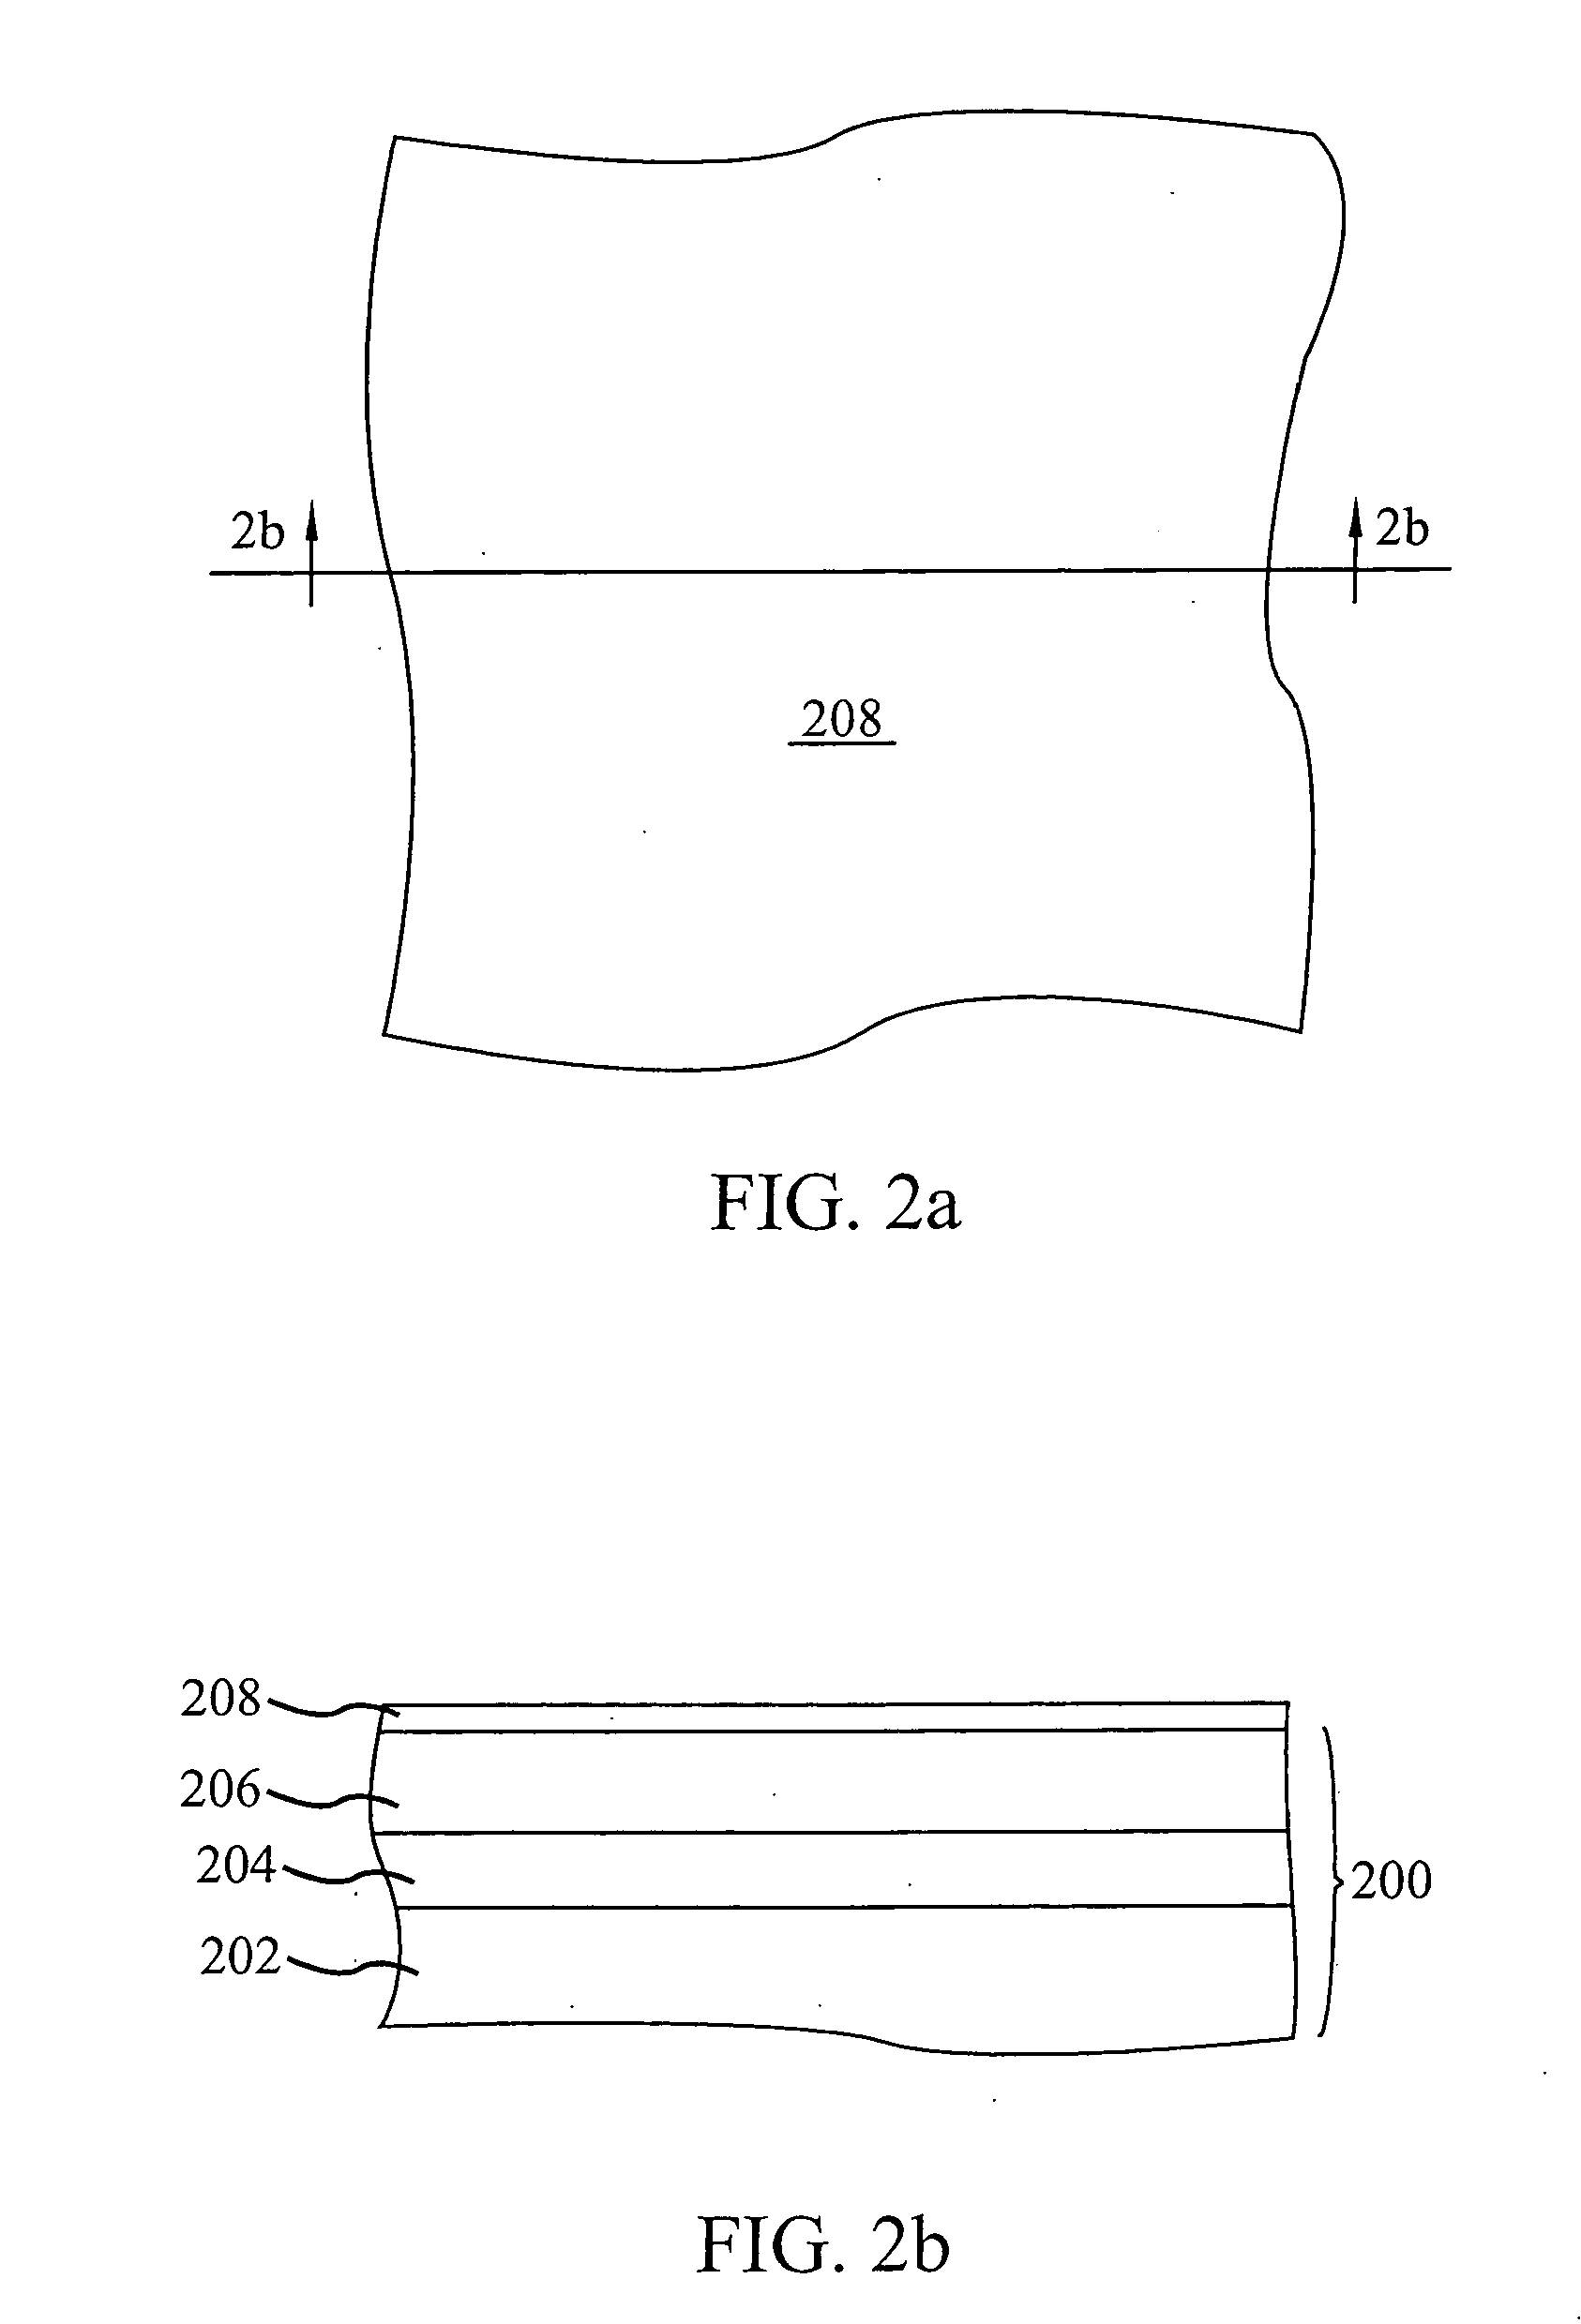 FinFET SRAM cell using low mobility plane for cell stability and method for forming